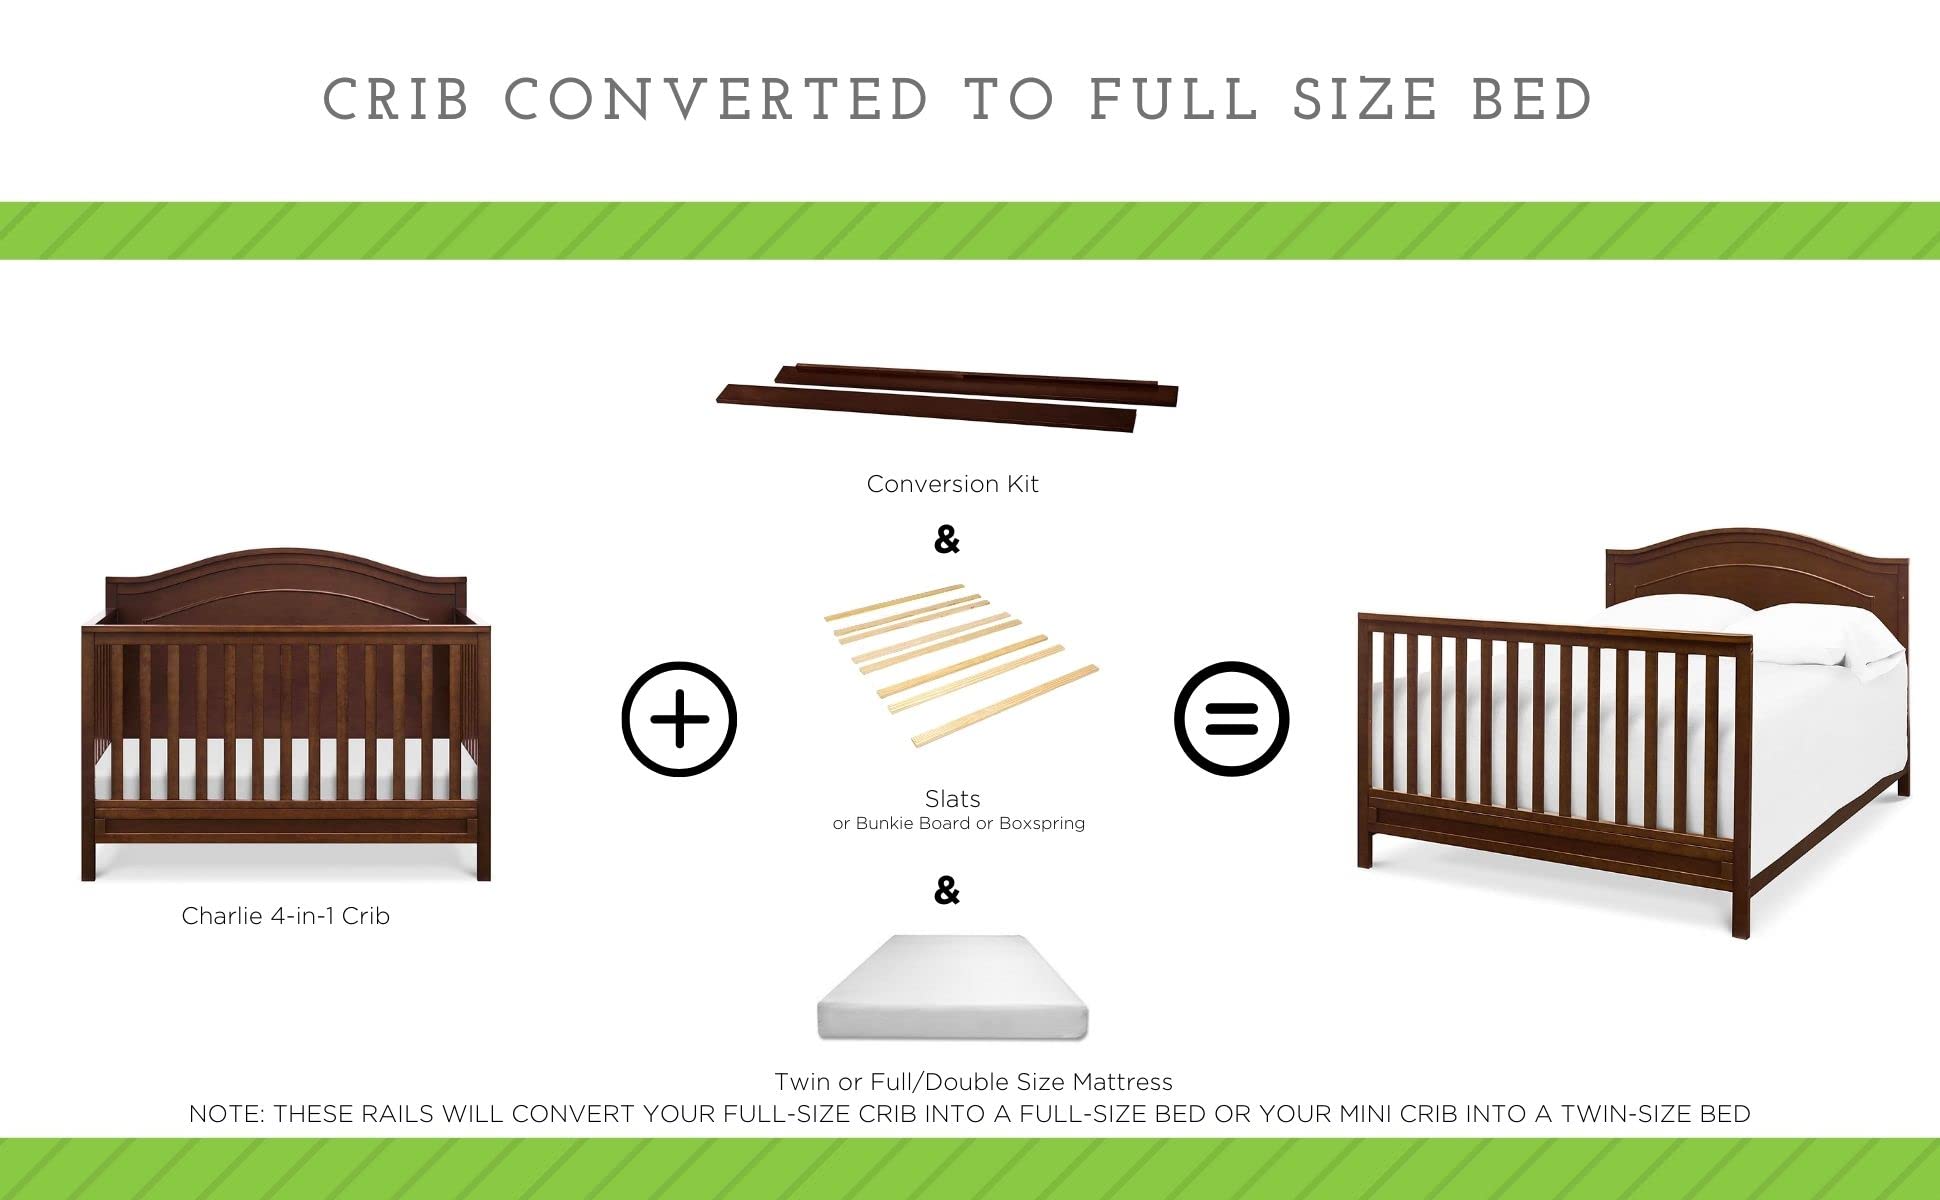 CC KITS Full Size Conversion Kit Bed Rails for Davinci Meadow 4-in-1 Crib (Slate)